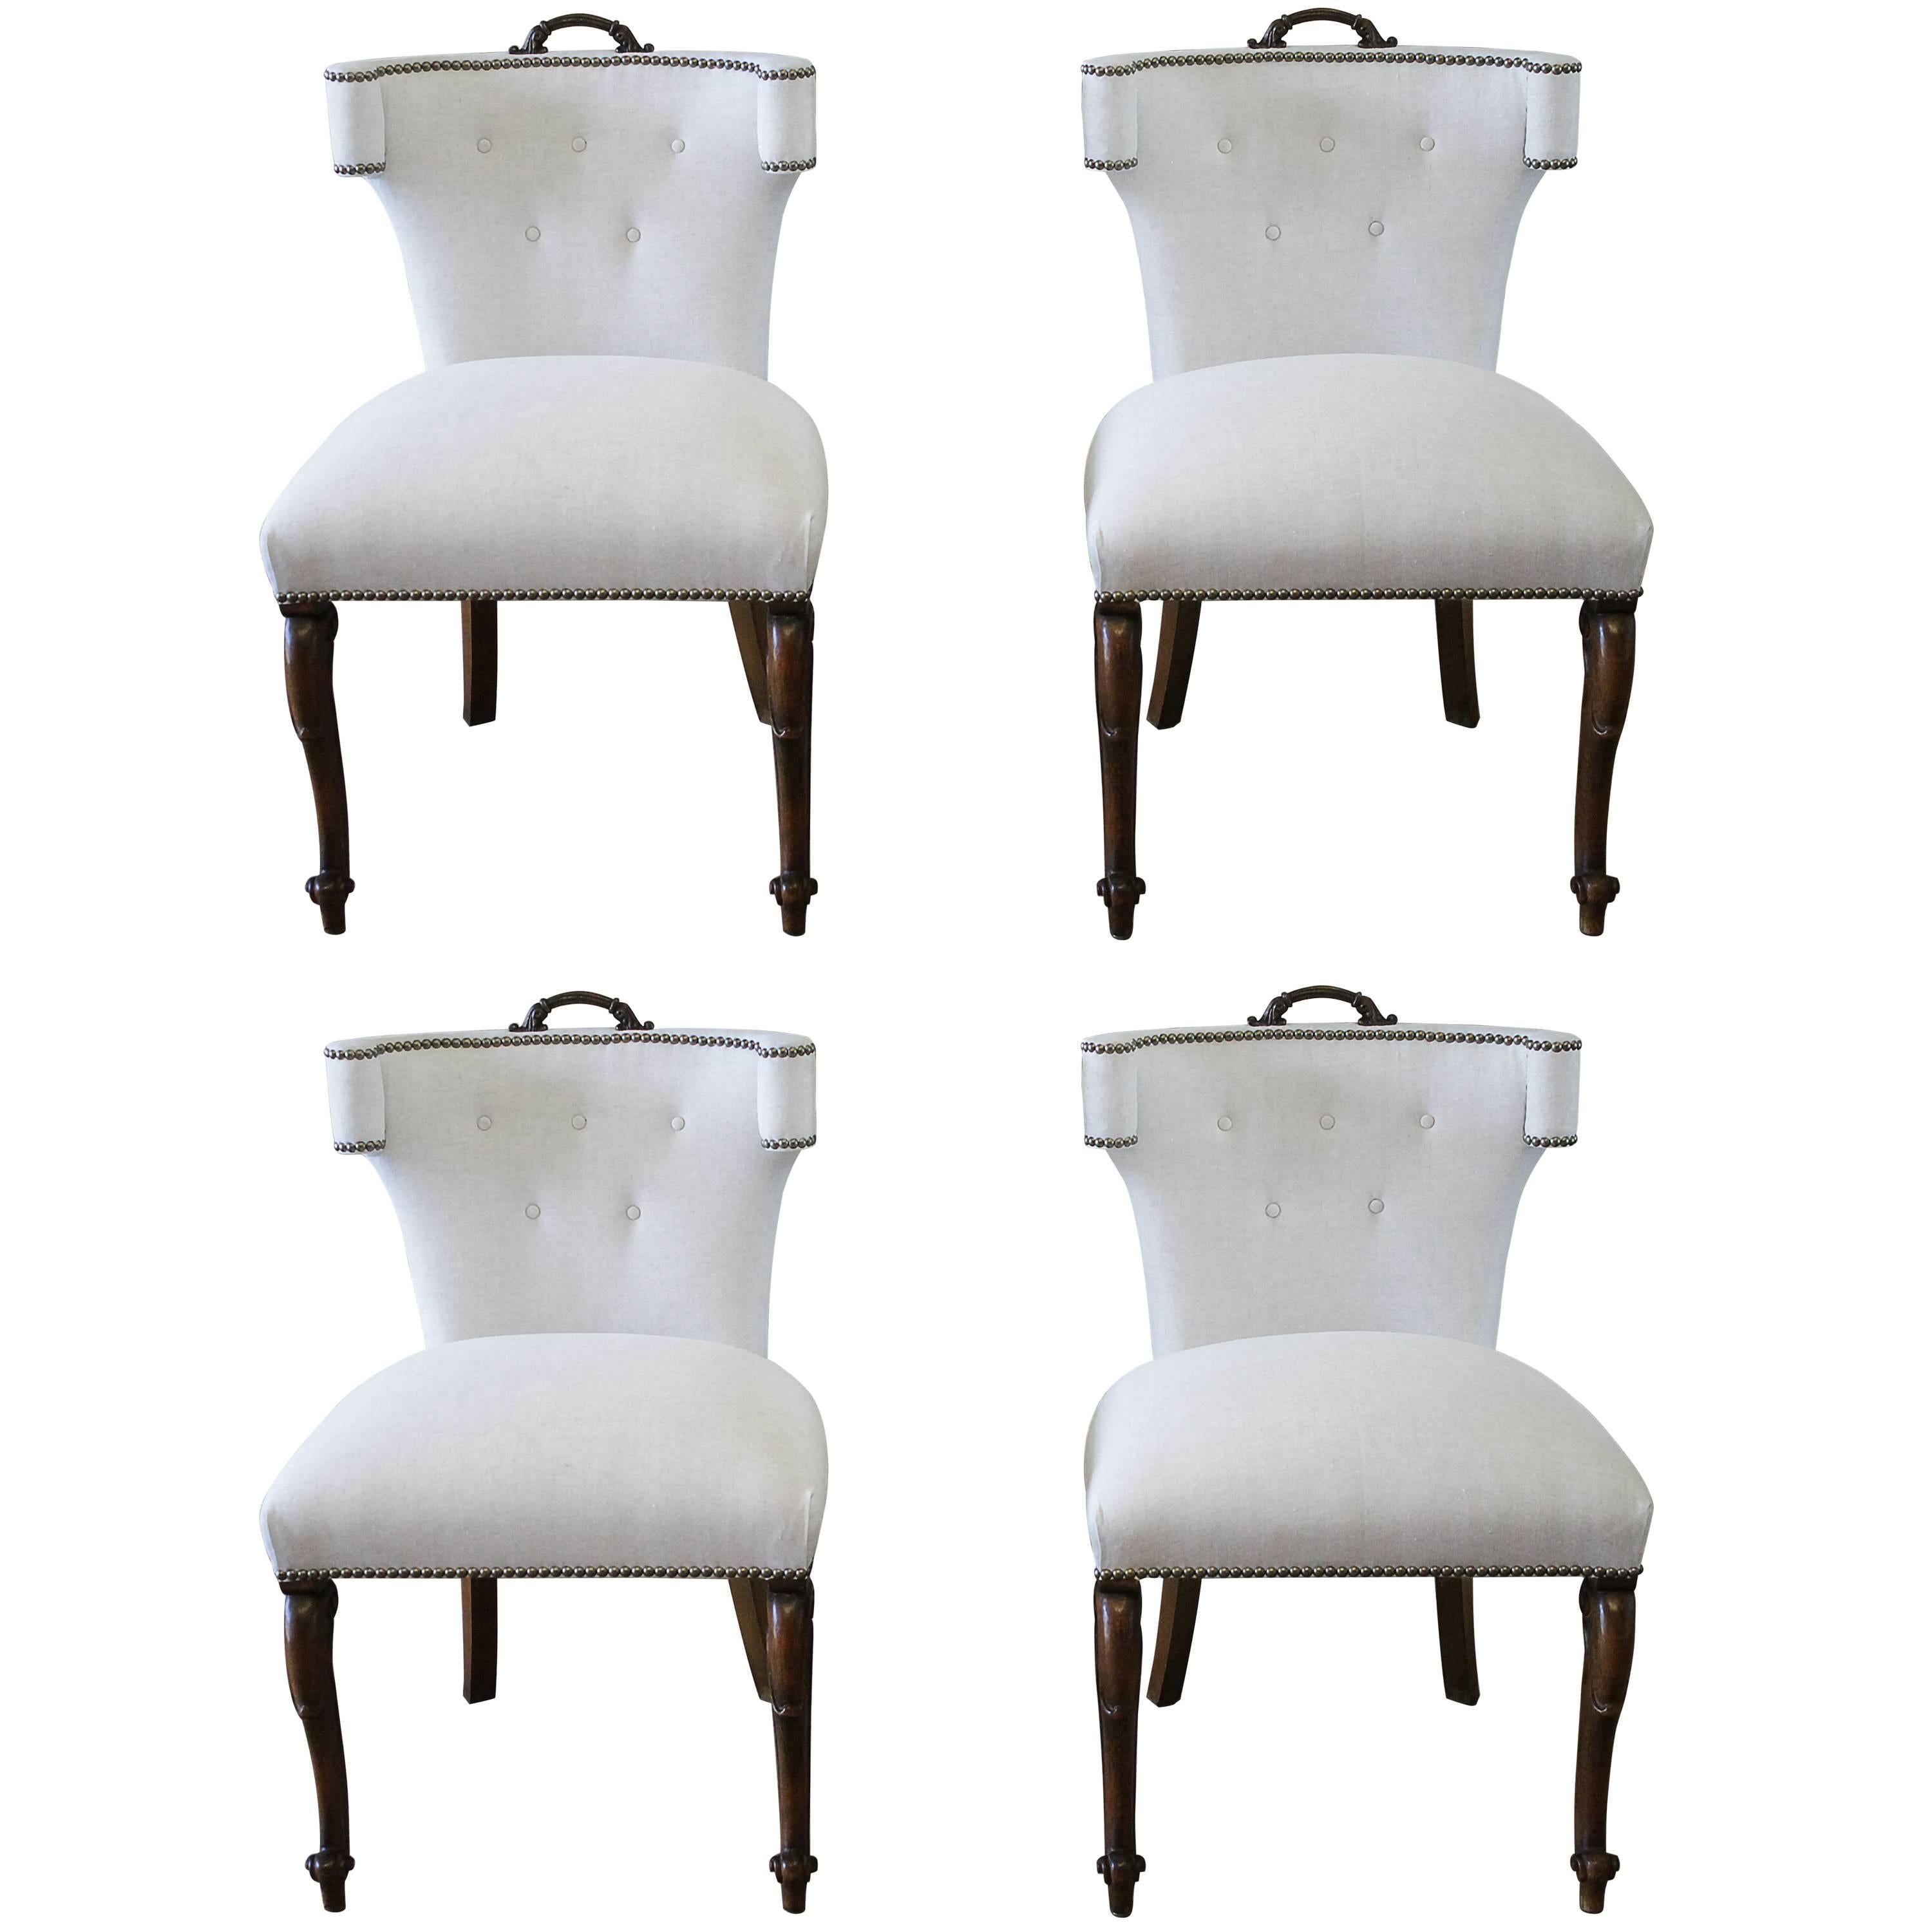 Set of Four Early 20th Century Linen Upholstered Dining Chairs